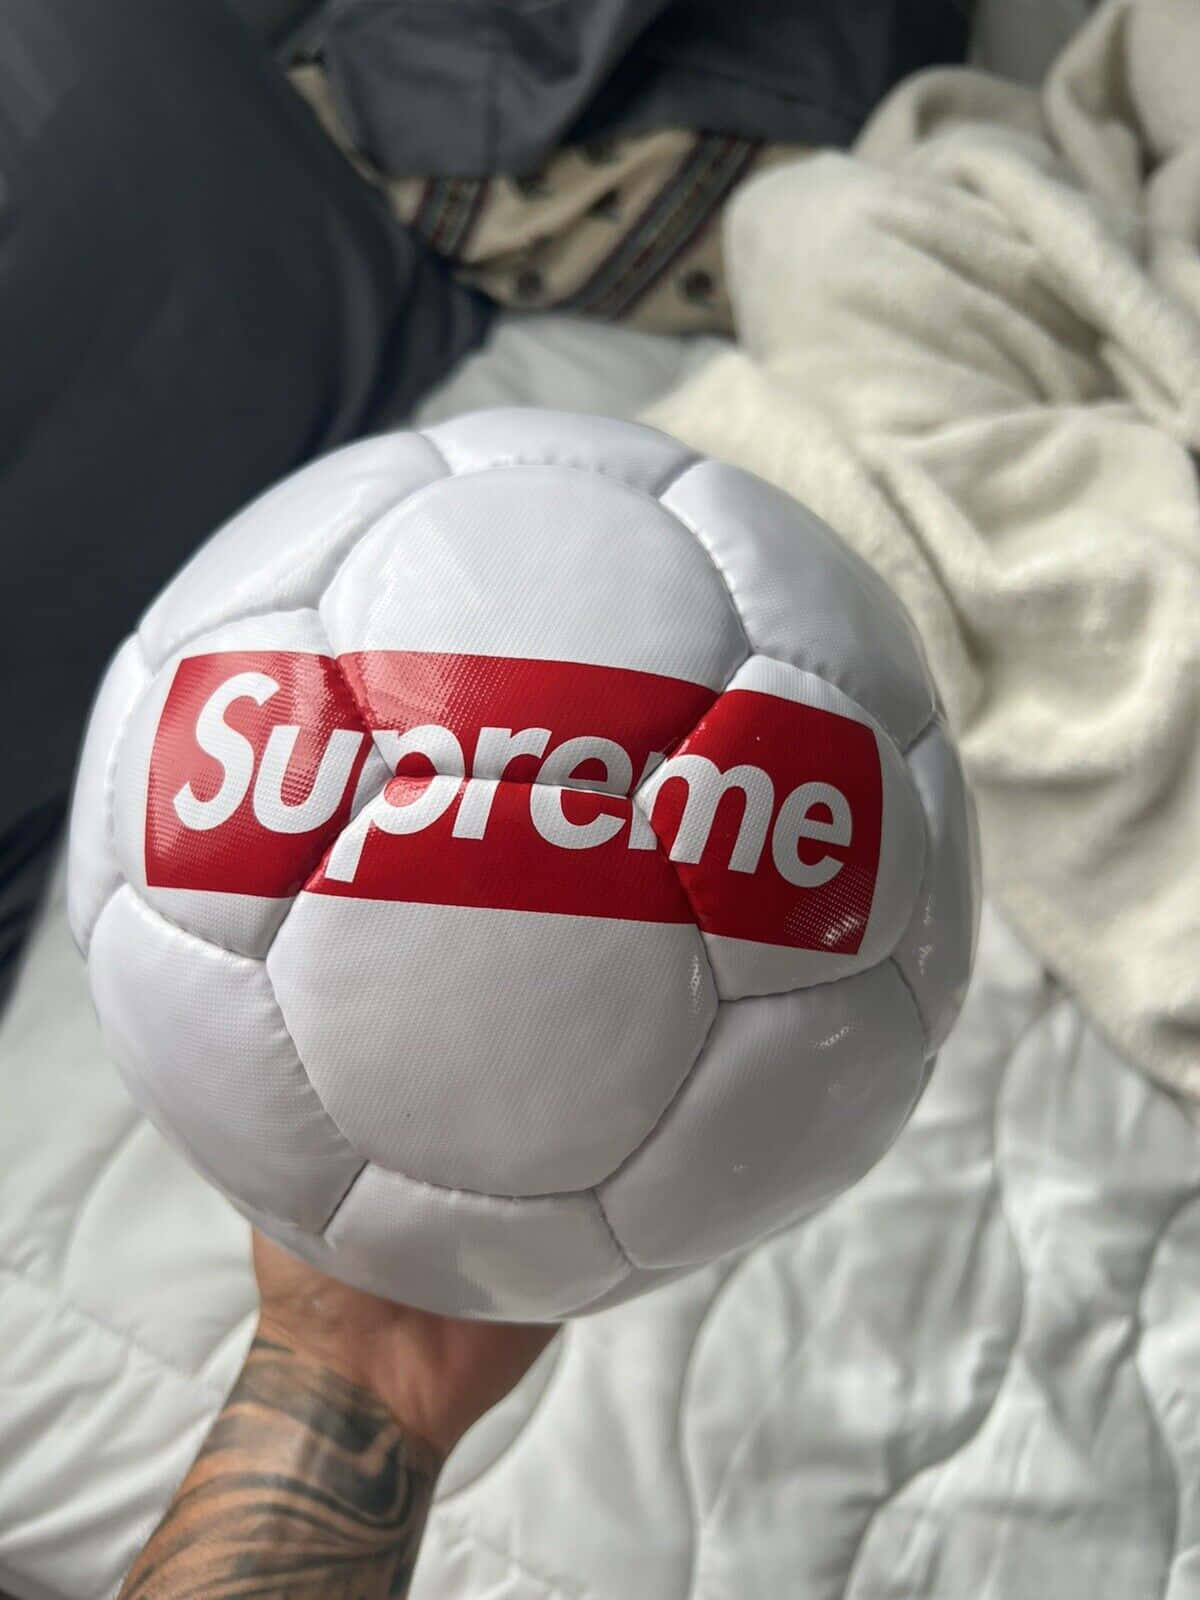 Supreme aesthetic, android, brand, edge, red, supreme, white, HD